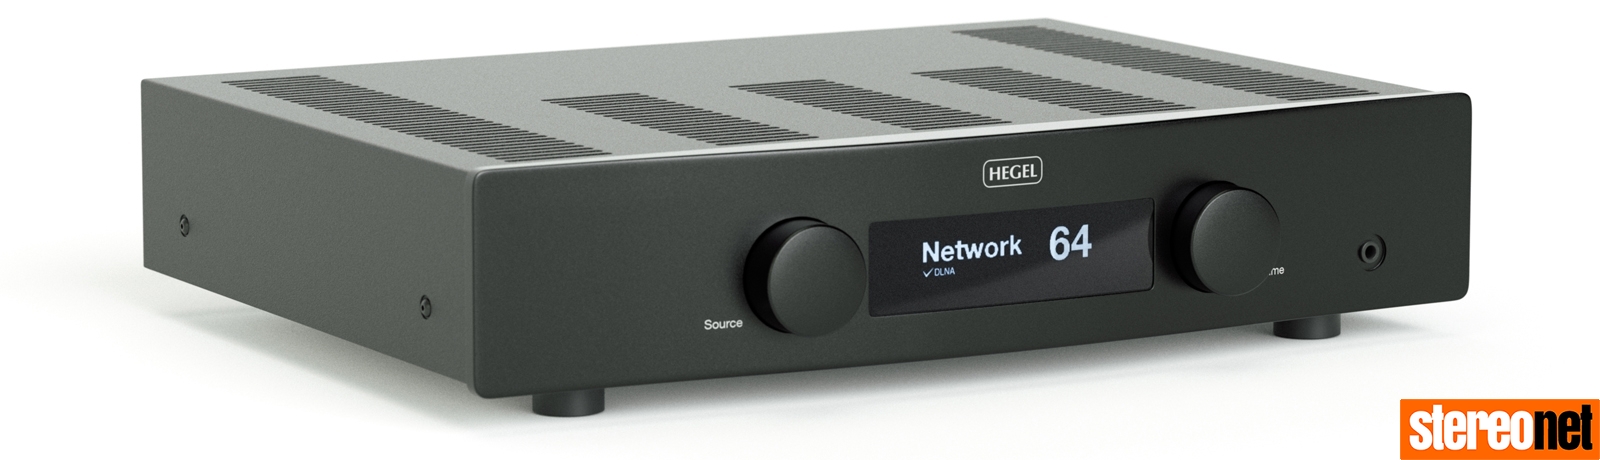 Hegel H95 Review